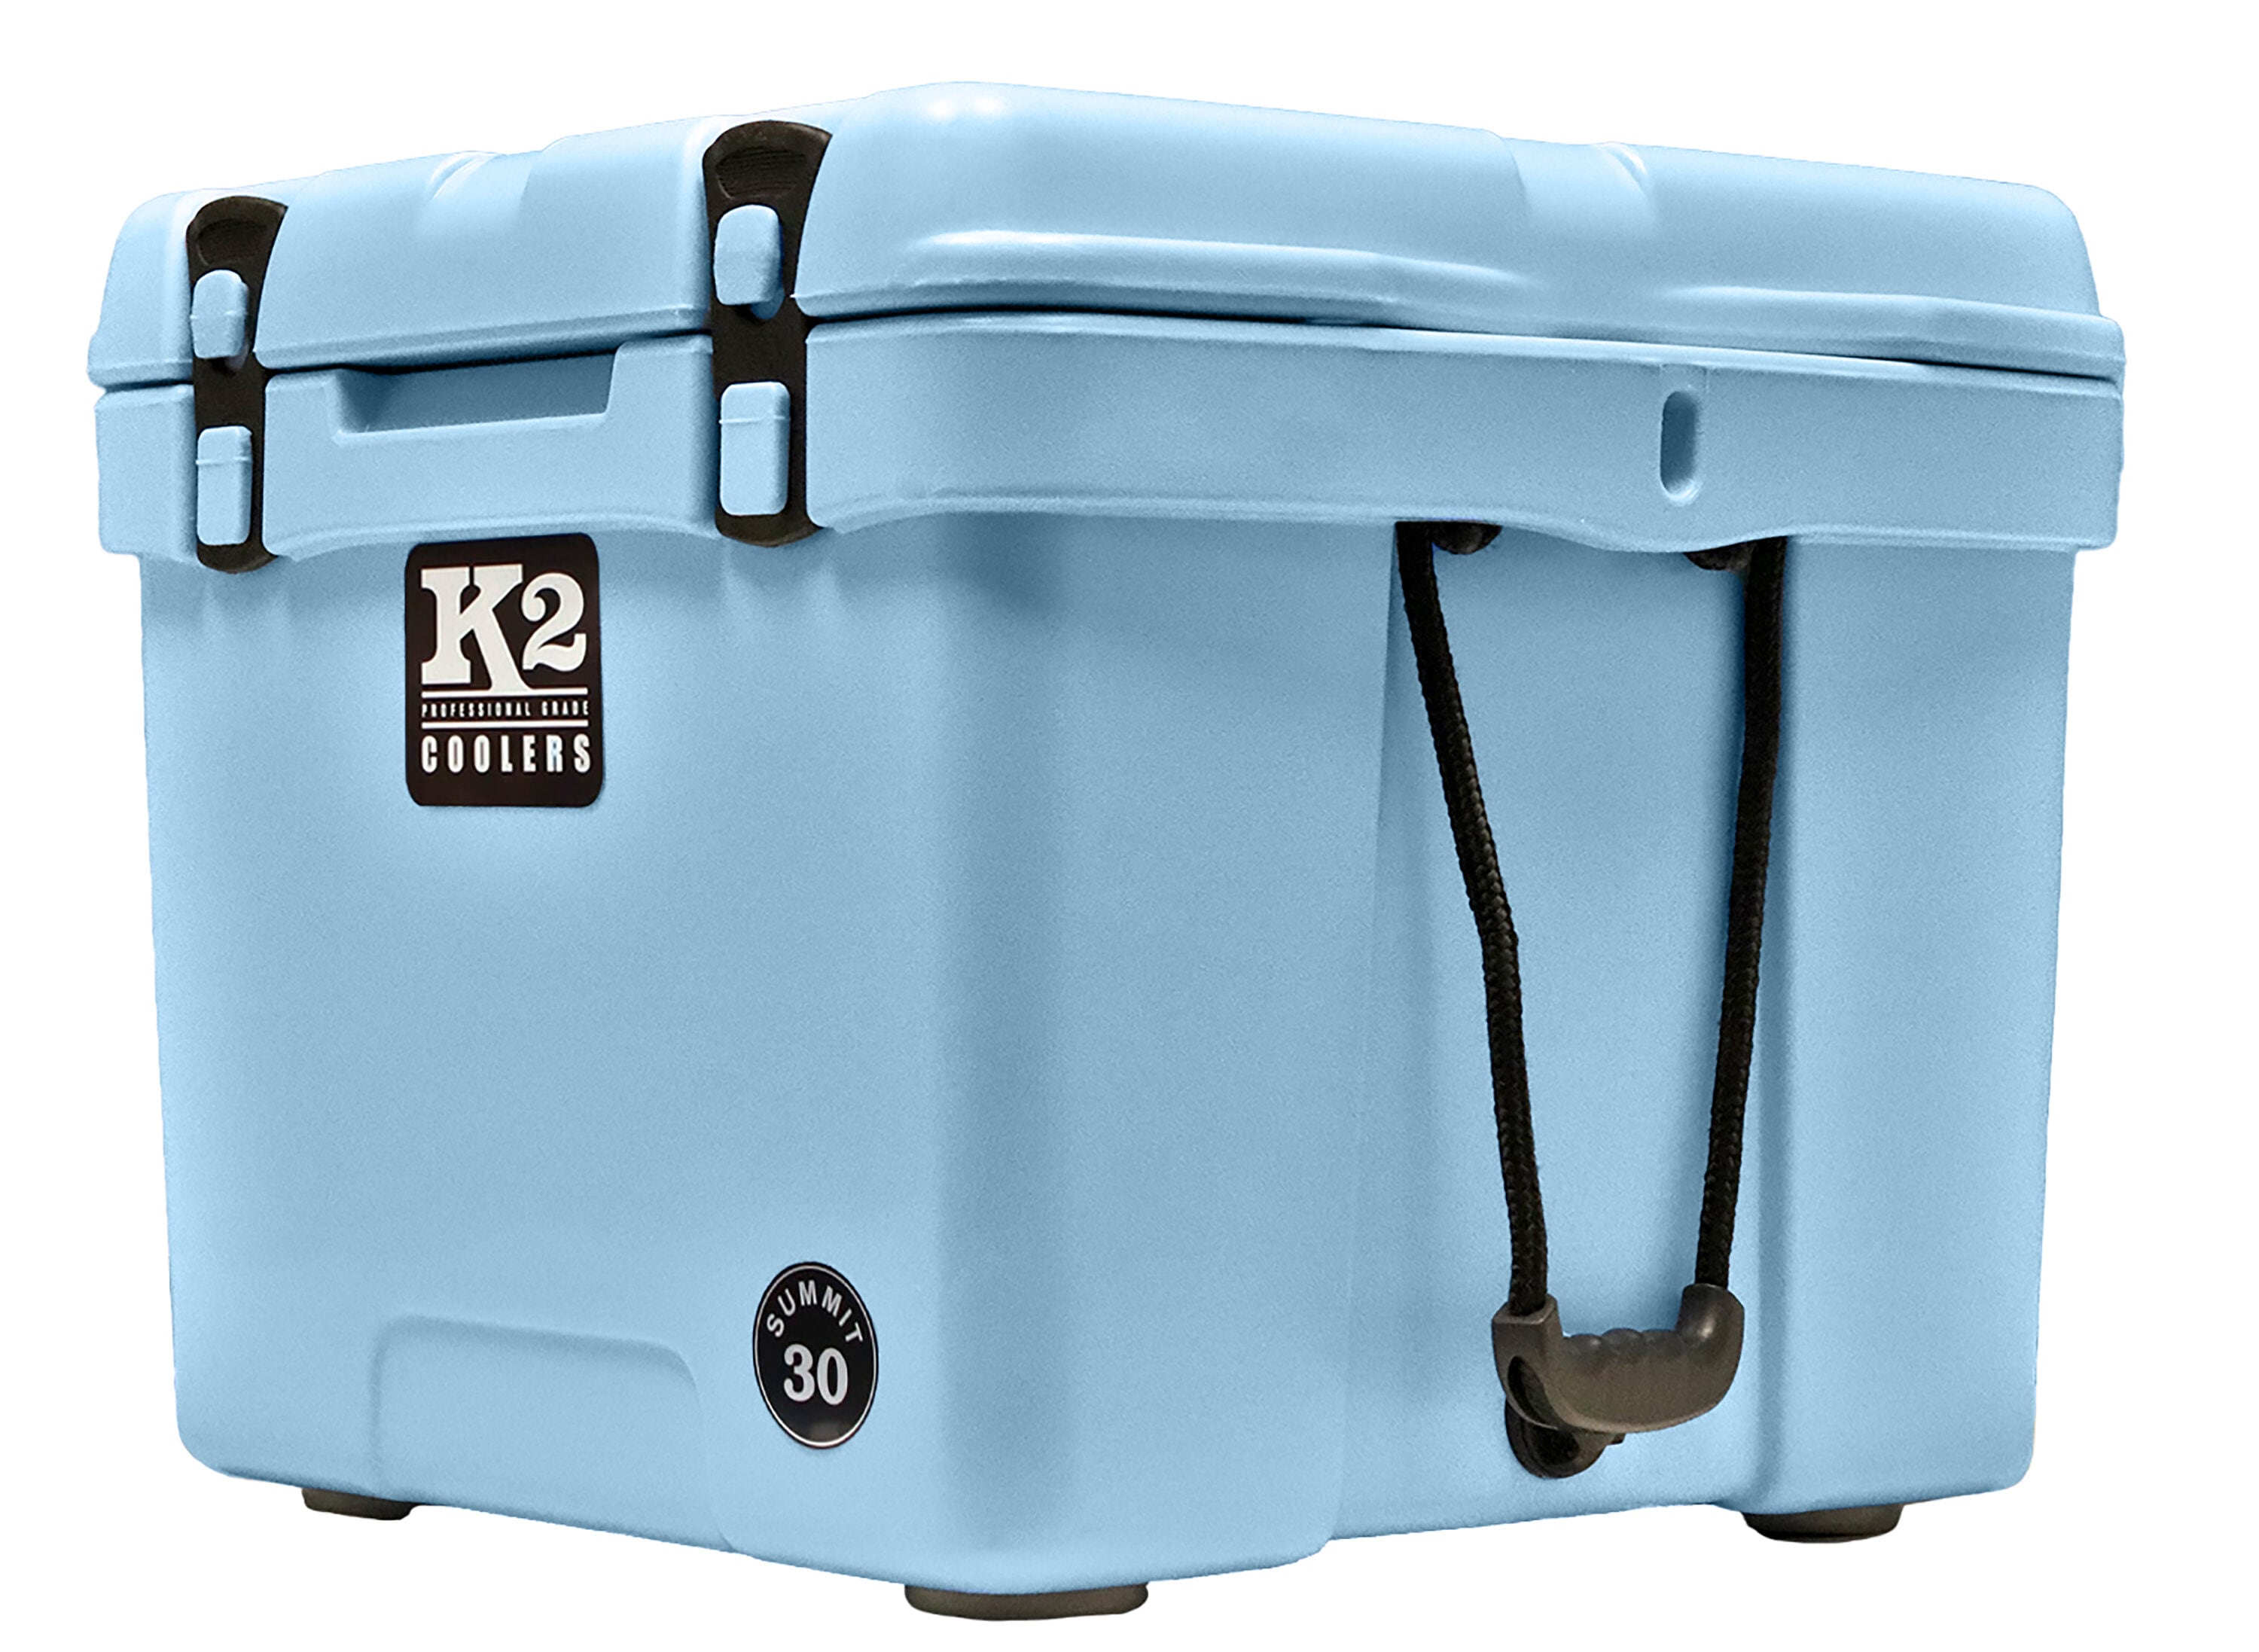 K2 Coolers (@K2Coolers) / X